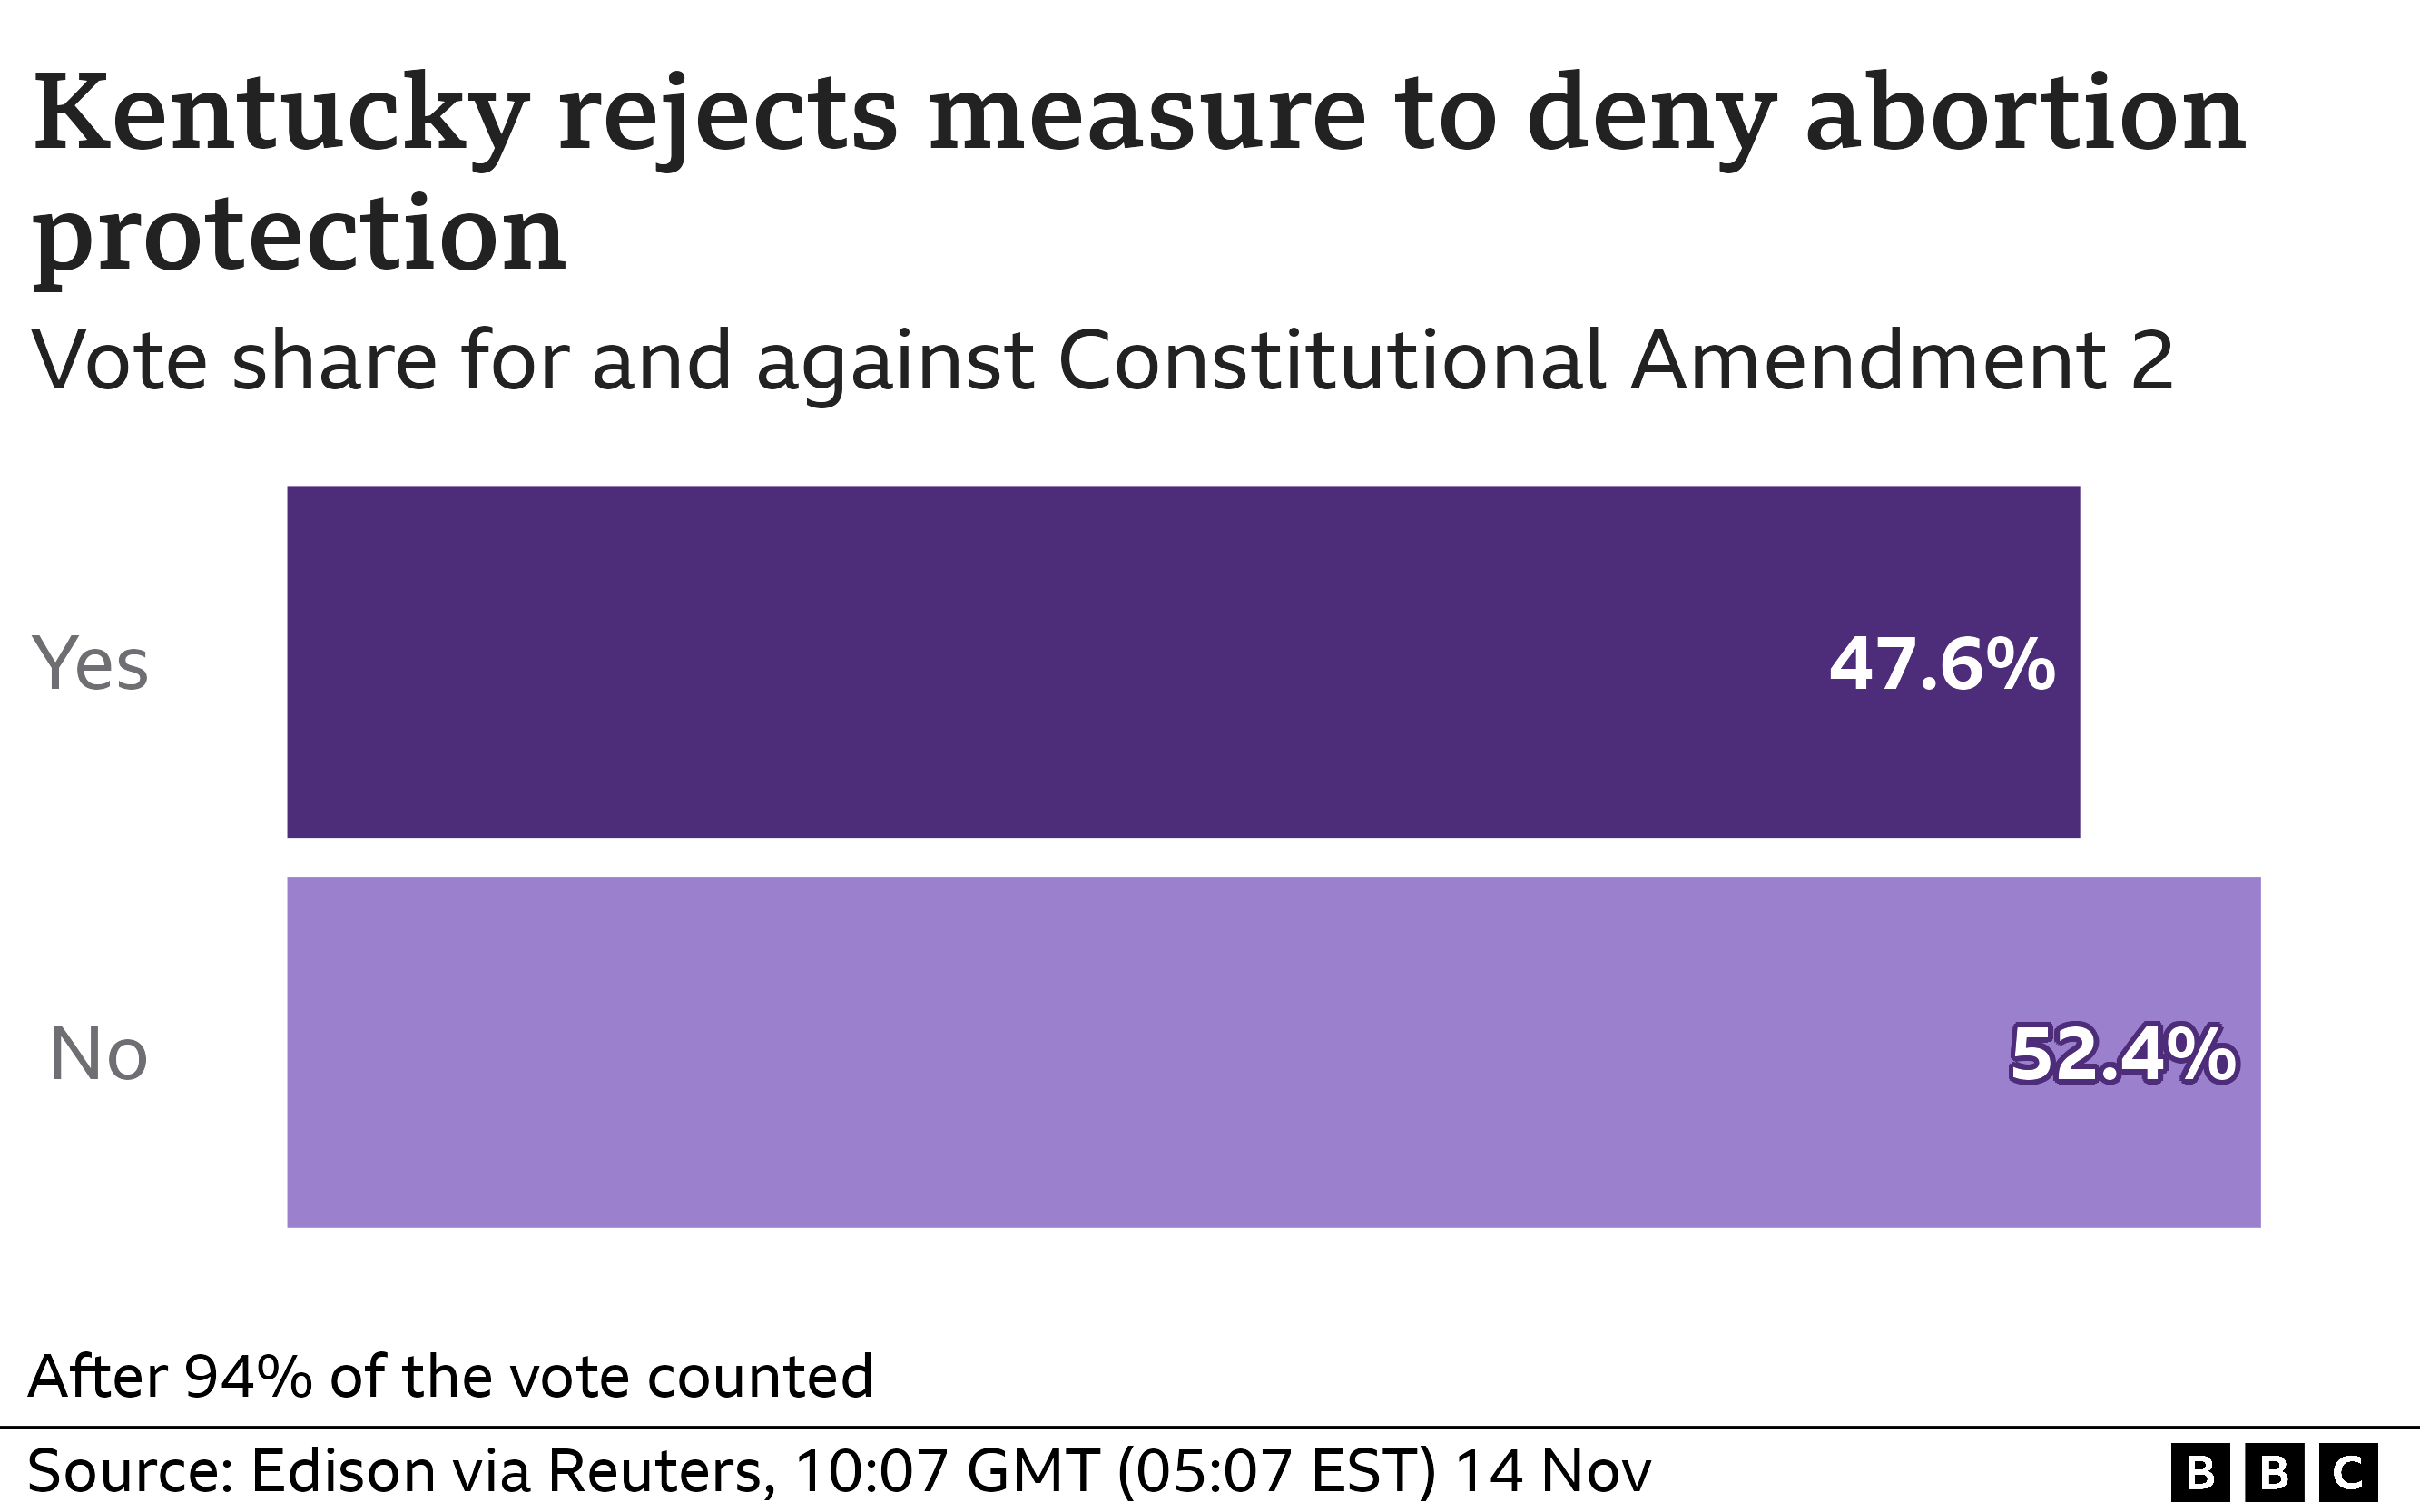 Kentucky rejects measure to deny abortion protection. 52.4% voted No, 47.6% of people voted Yes to the constitutional amendment.